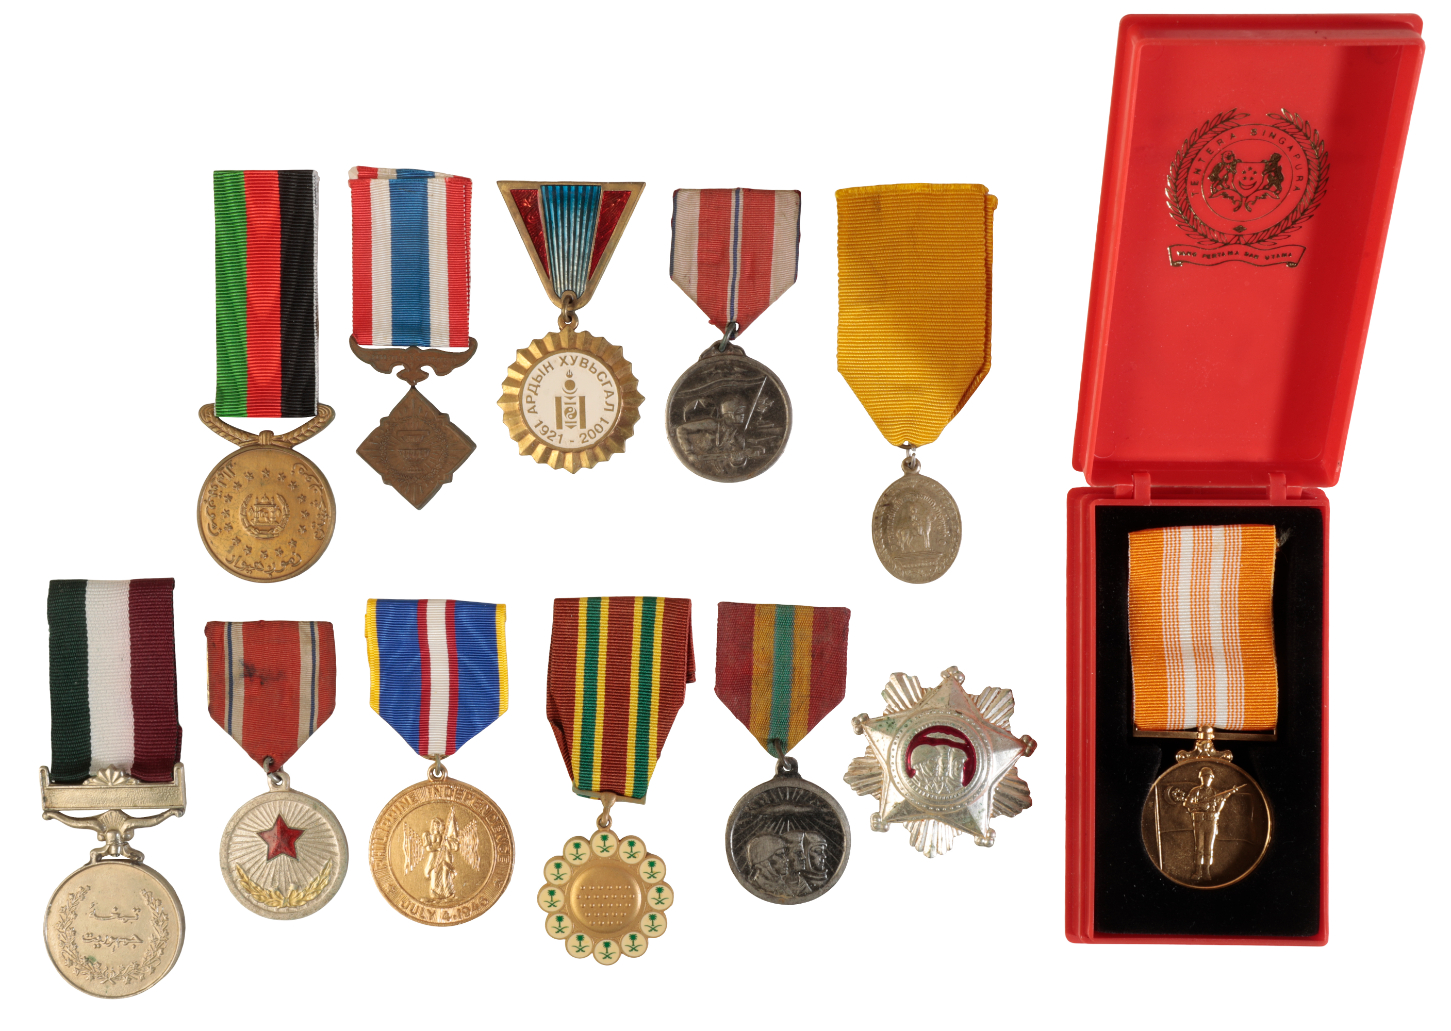 A COLLECTION OF MEDALS OF ASIAN